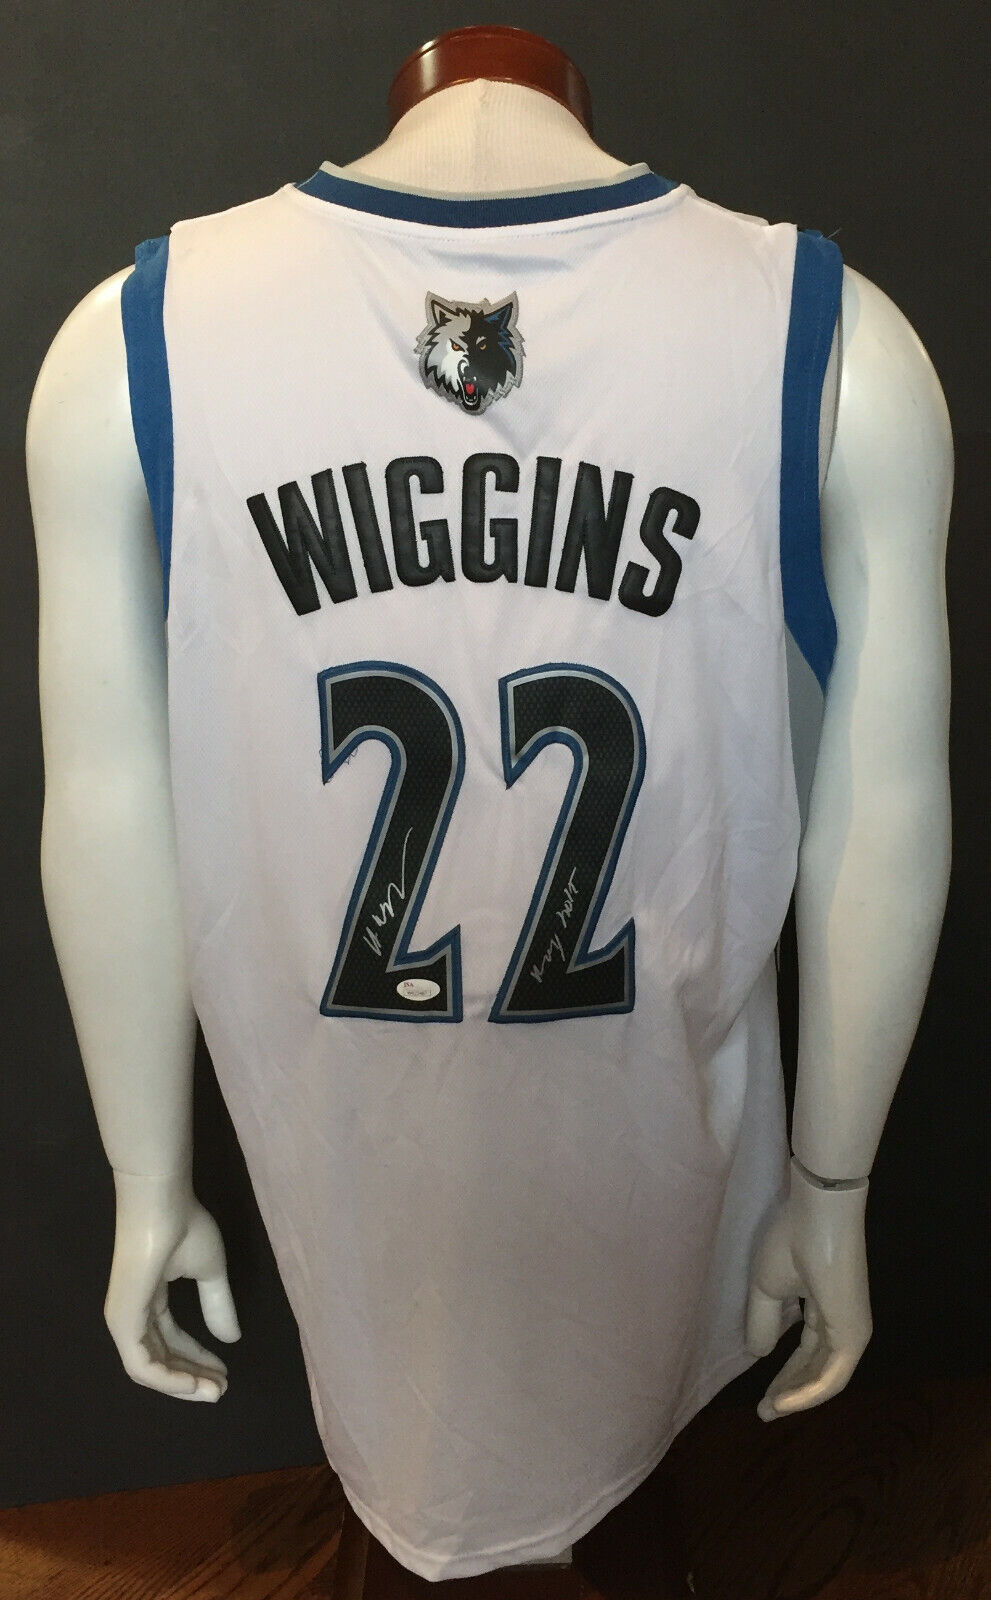 Andrew Wiggins Signed Timberwolves Basketball Jersey INS ROY 2015 Autograph JSA Image 1